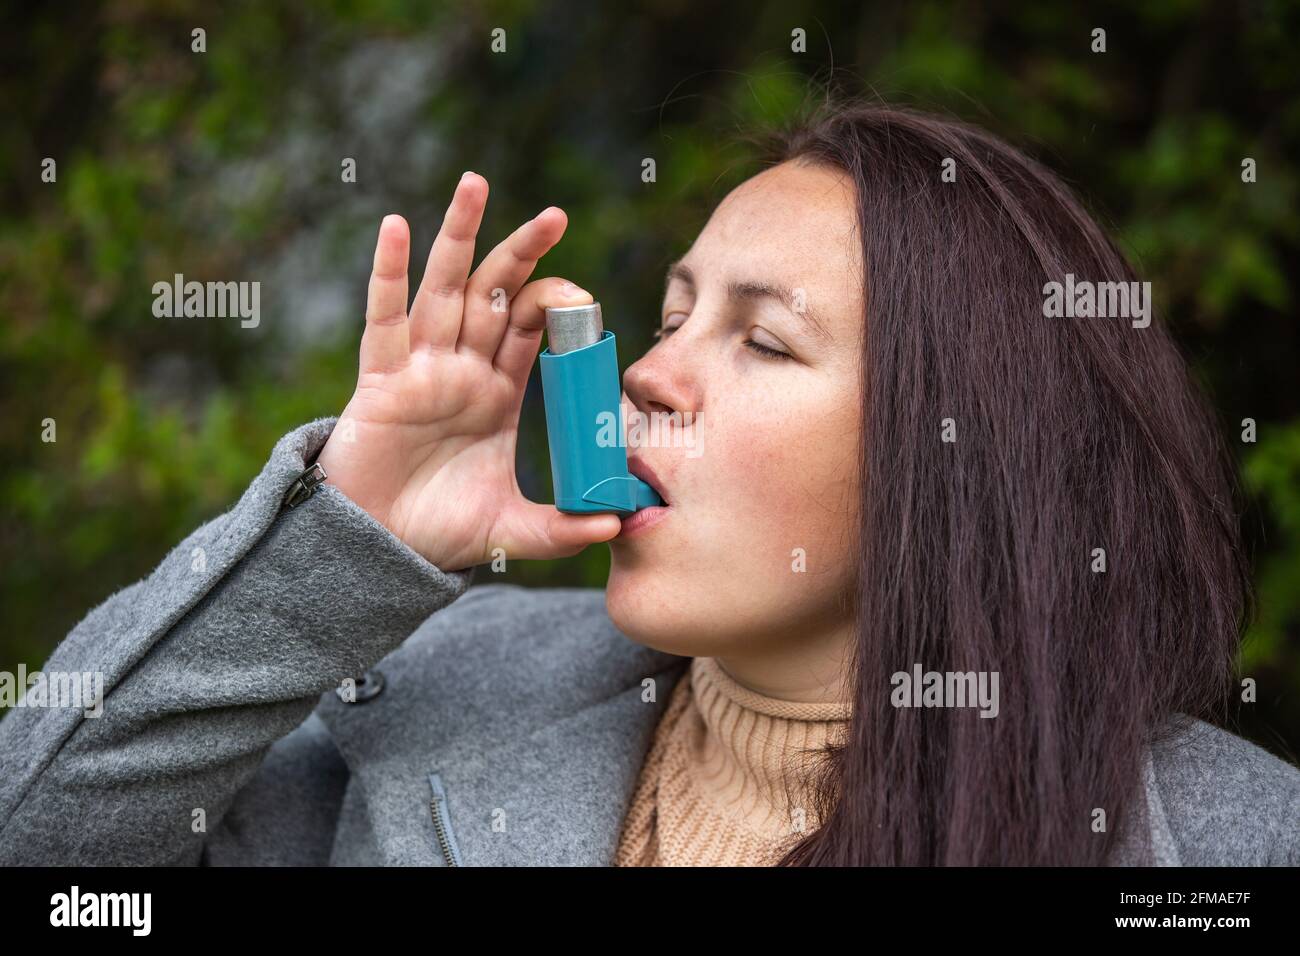 Pretty young brunette woman using an asthma inhaler during strong asthma attack, pharmaceutical product is used to prevent and treat wheezing and Stock Photo